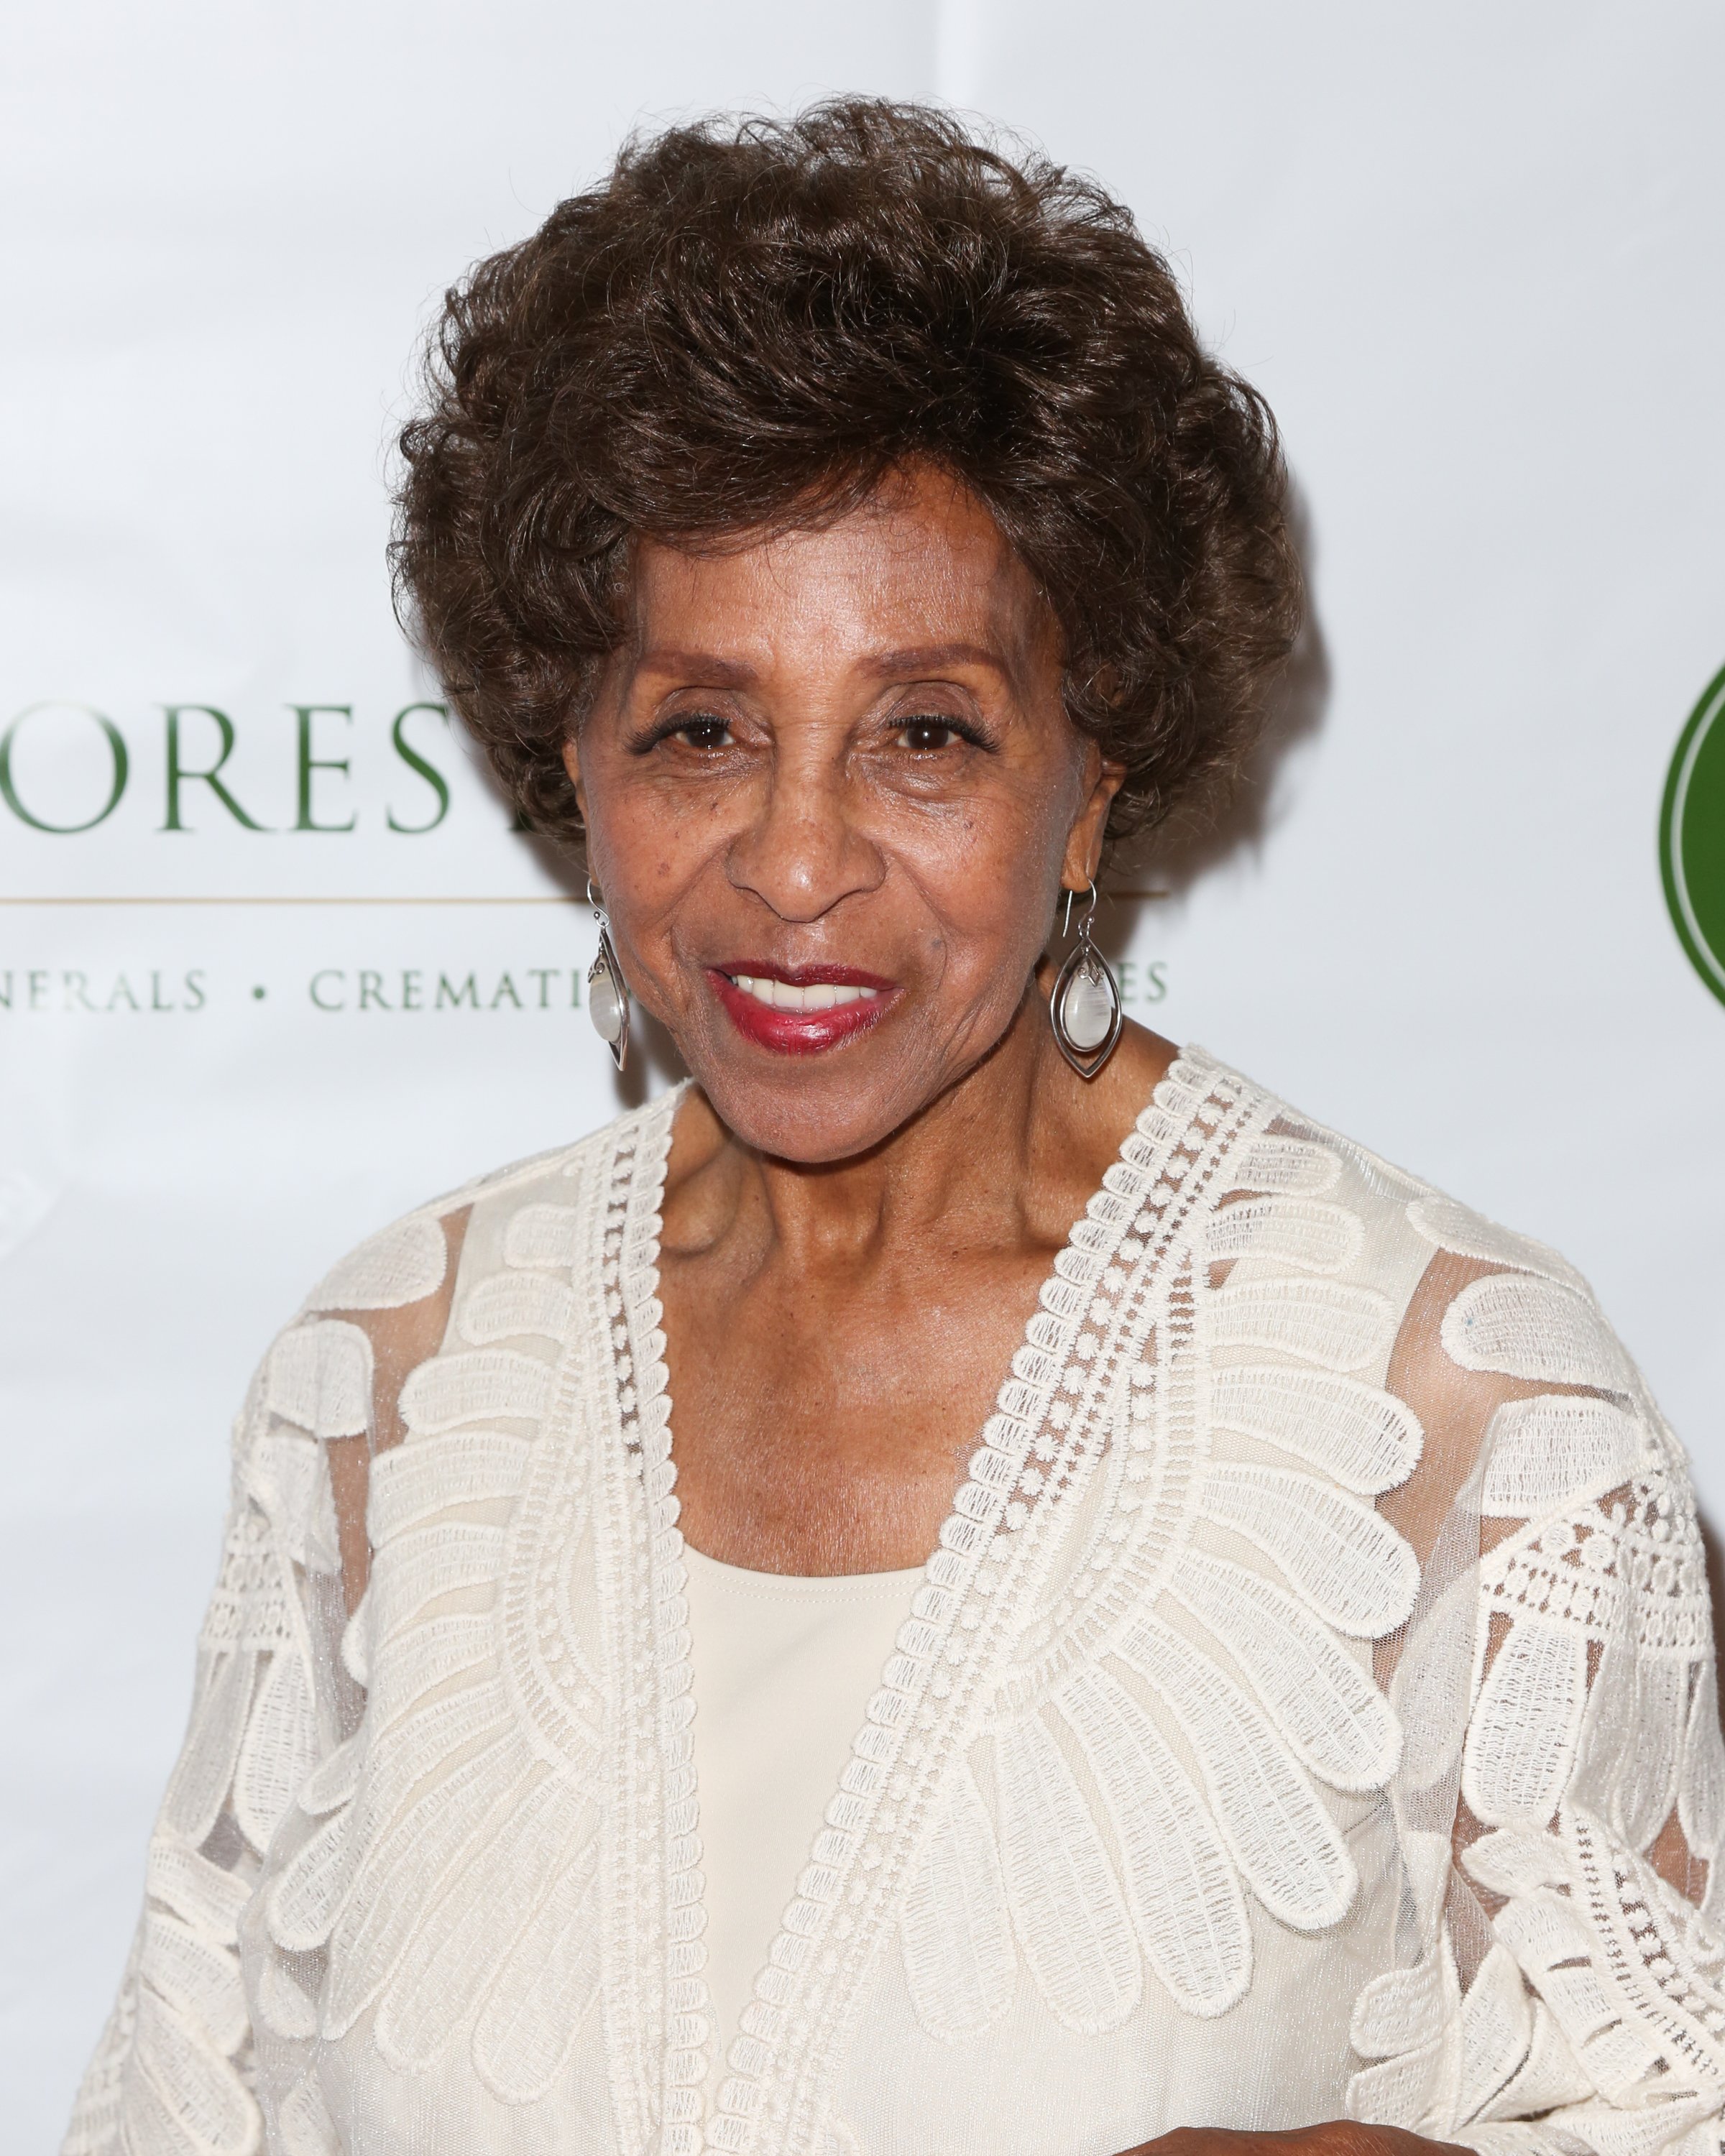 Marla Gibbs at The John Edgar Wideman Experience on February 3, 2018 in Los Angeles, California | Photo: Getty Images